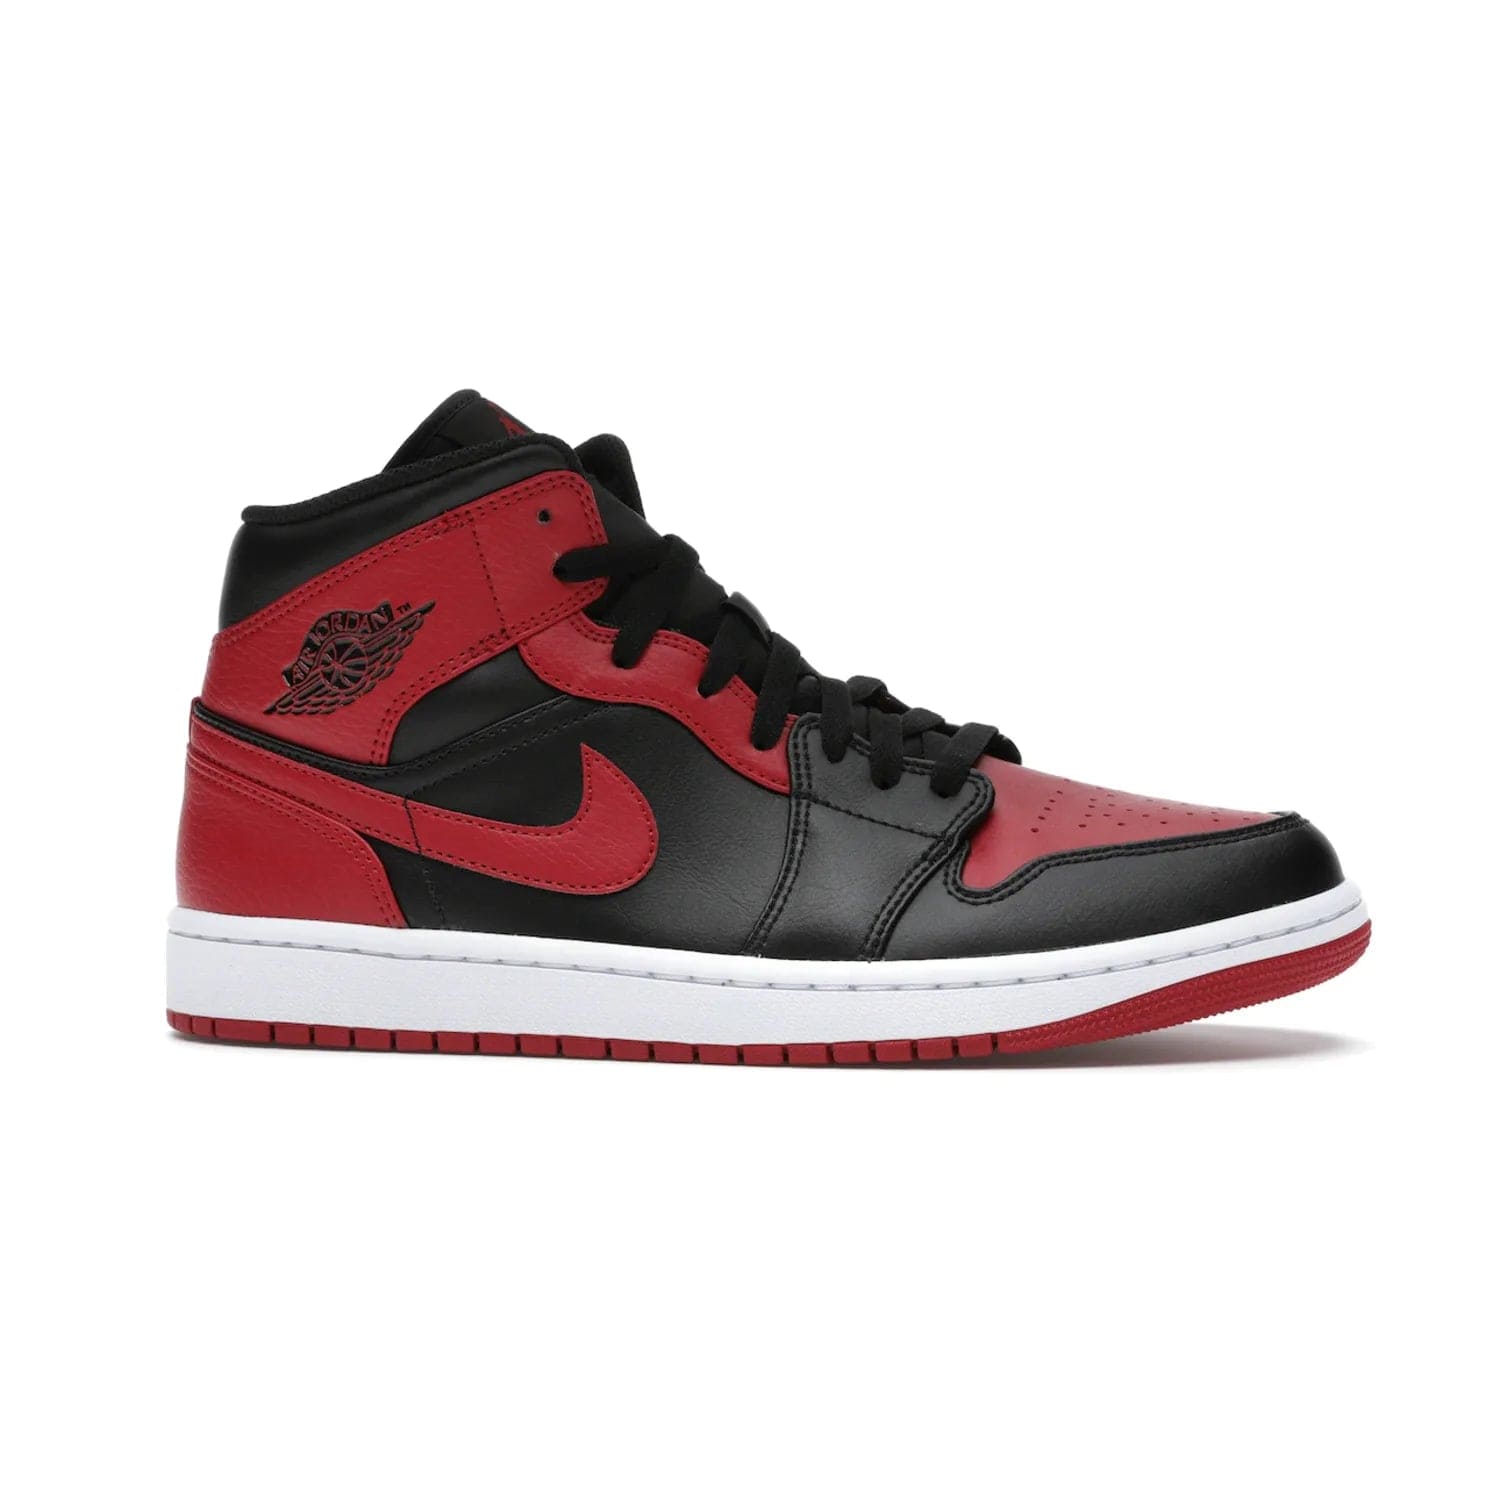 Jordan 1 Mid Banned (2020) - Image 2 - Only at www.BallersClubKickz.com - The Air Jordan 1 Mid Banned (2020) brings a modern twist to the classic Banned colorway. Features full-grain black and red leather uppers, red leather around the toe, collar, heel, & Swoosh. Release November 2021 for $110.